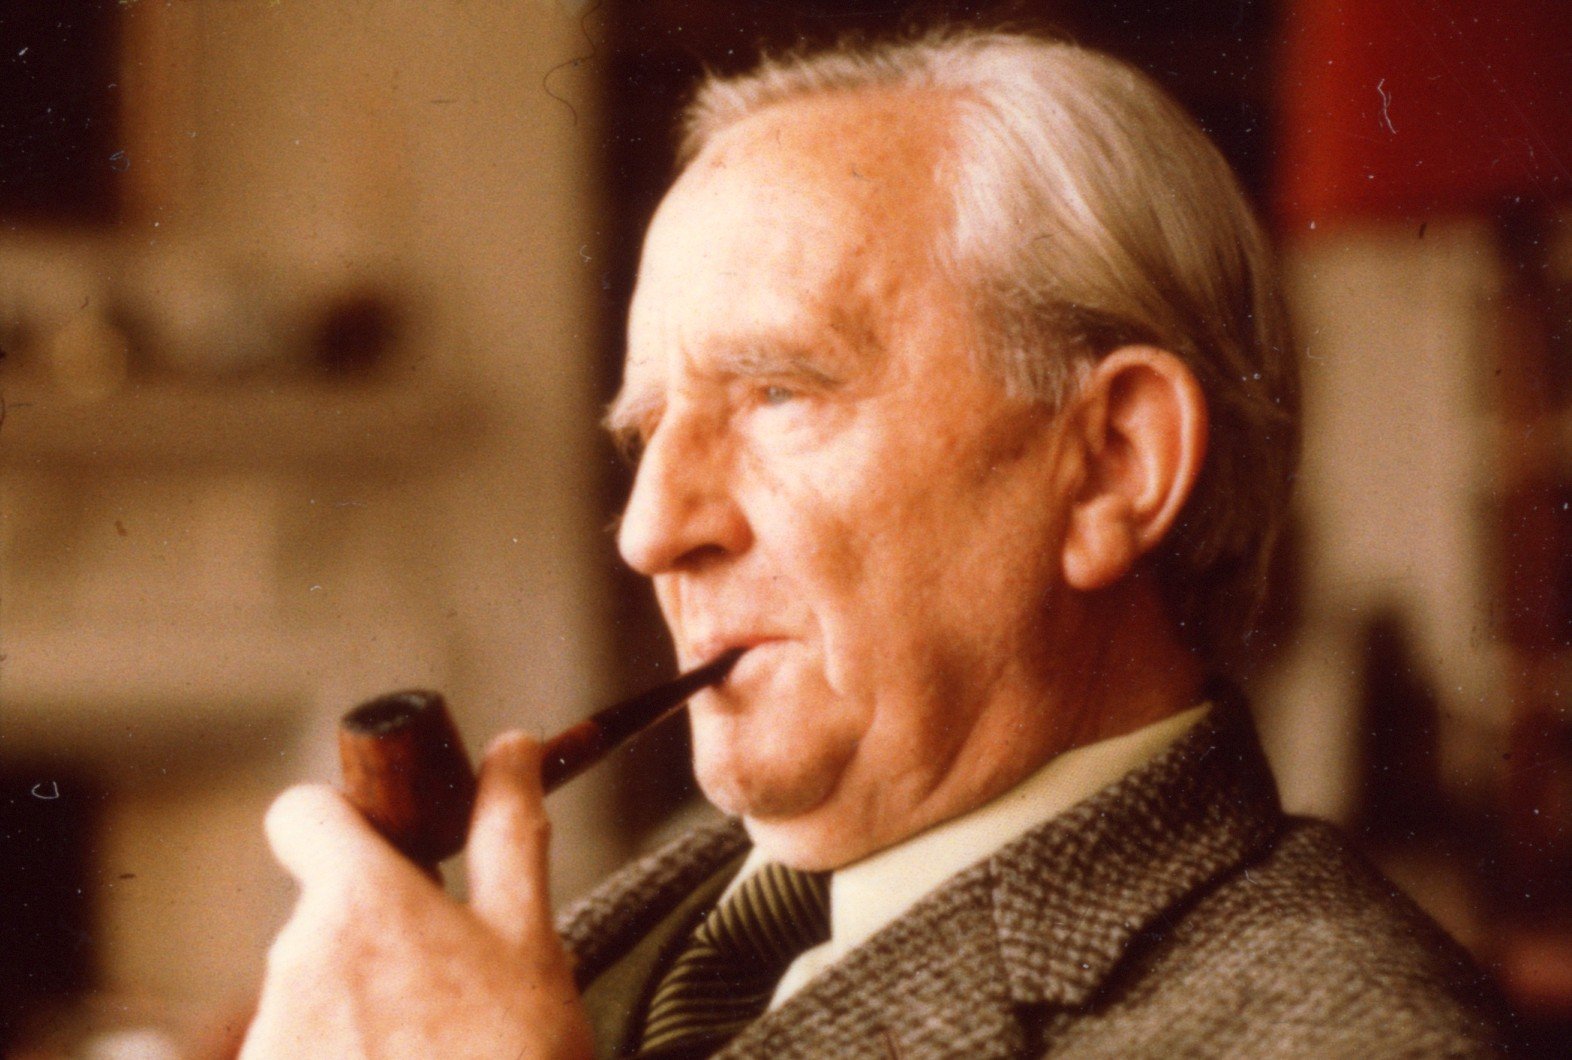 the lord of the rings trilogy by jrr tolkien